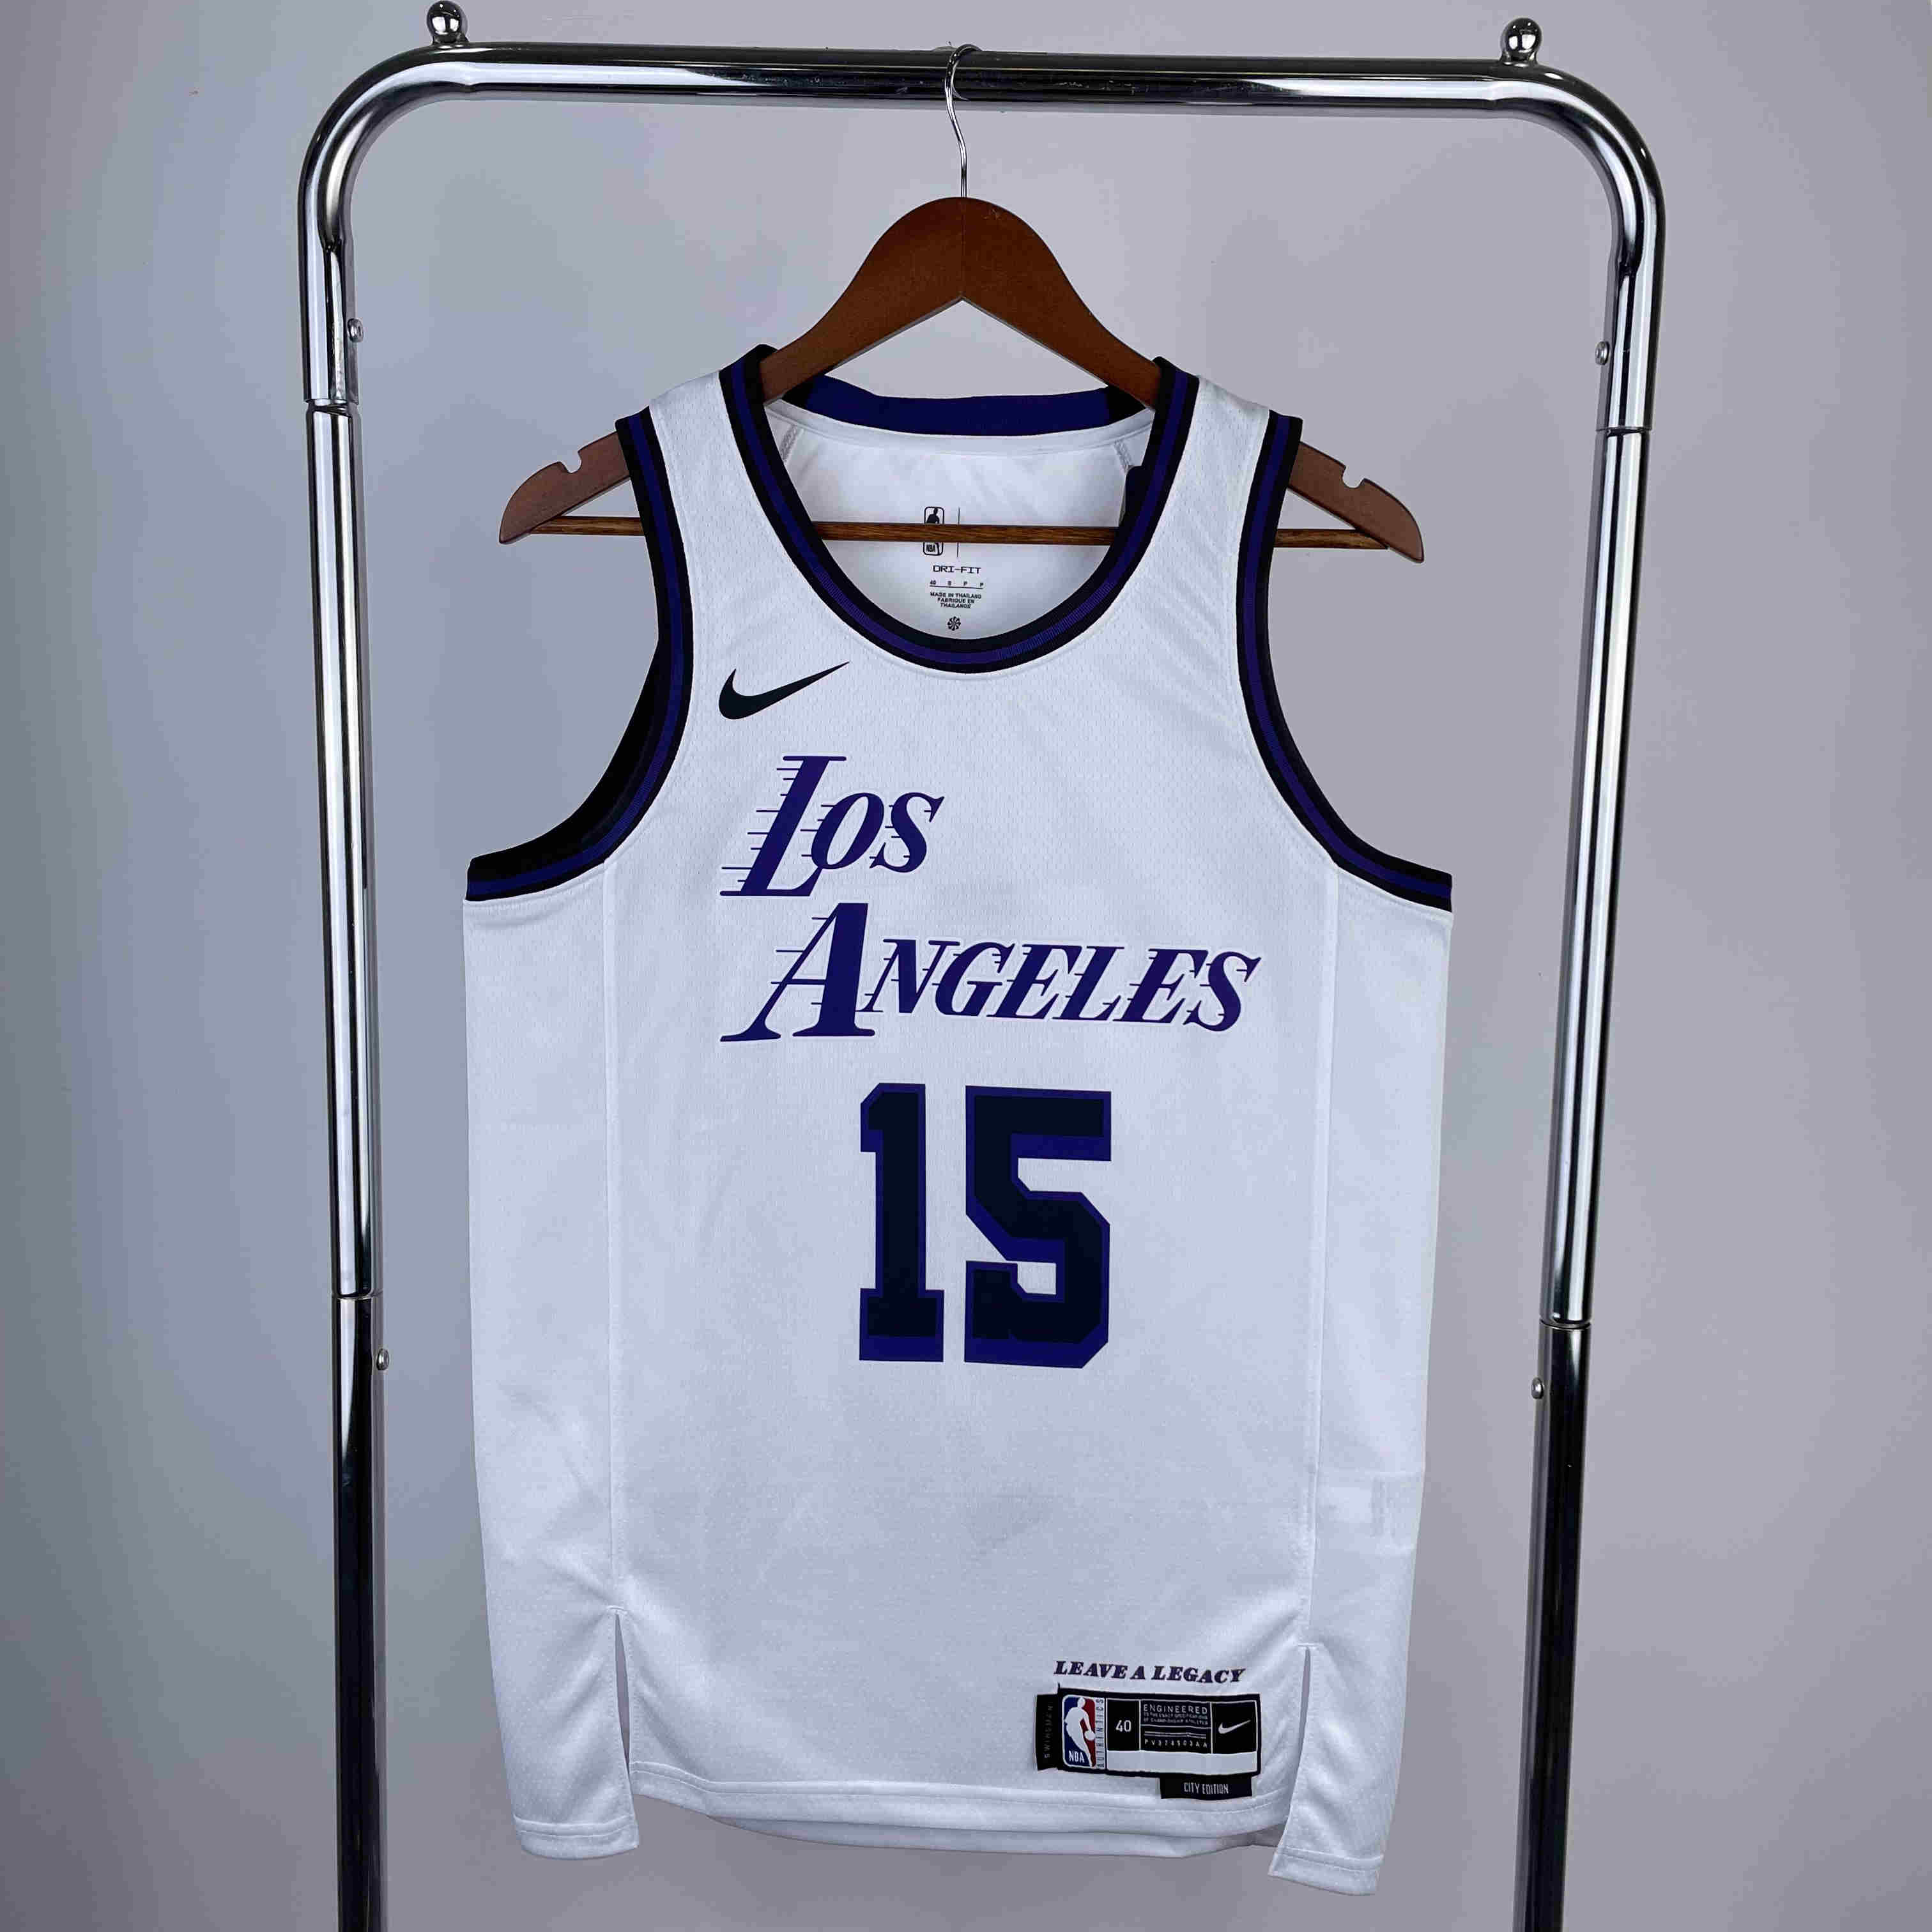 Los Angeles Lakers NBA Jersey reaves  15